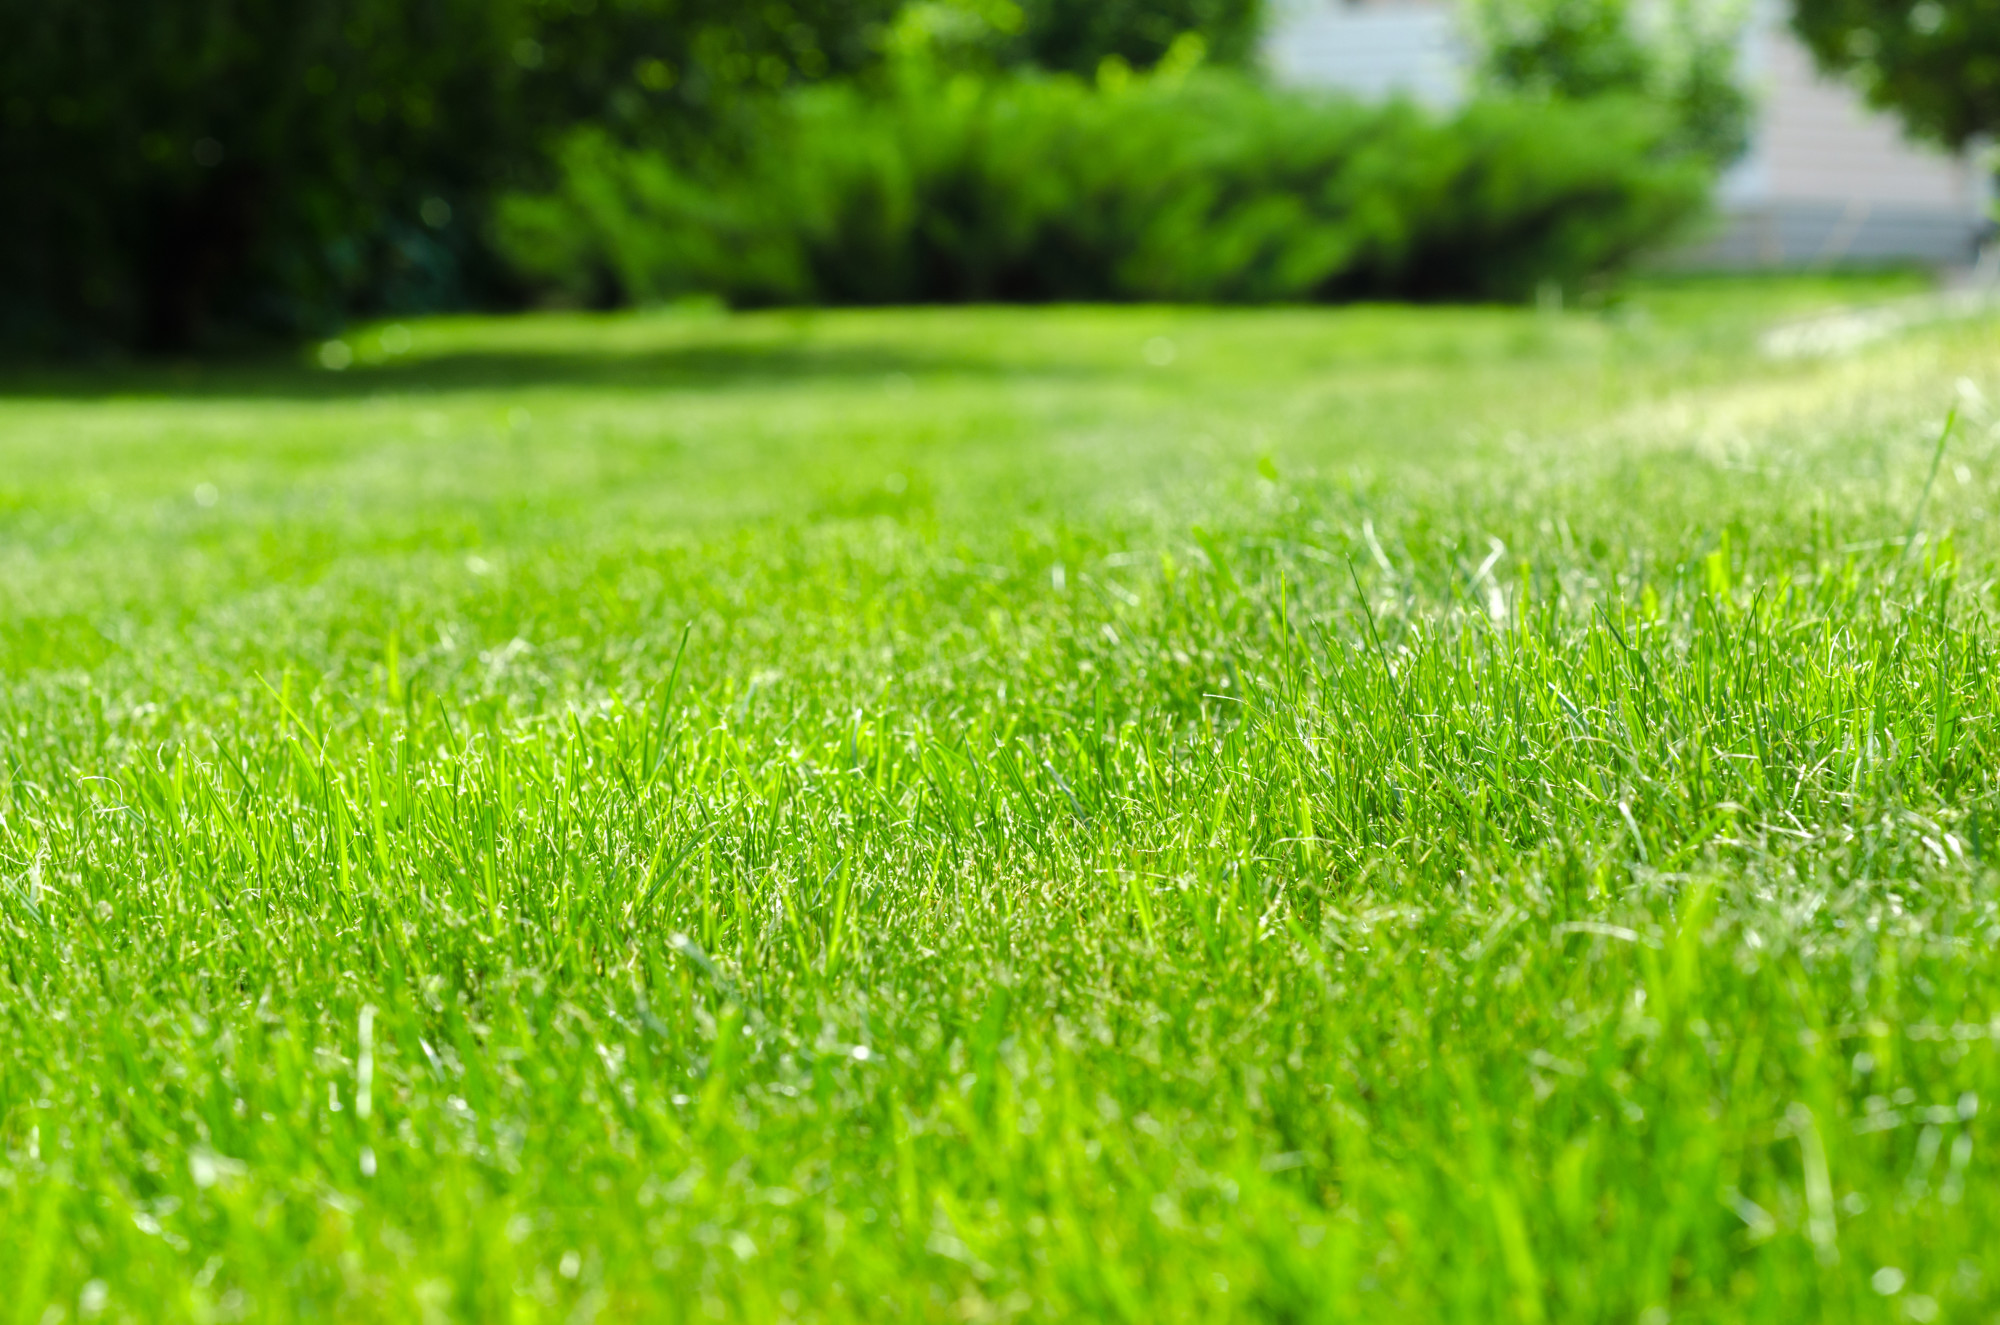 If you want lush, green grass, then you have to fertilize. Fertilizing a lawn can create the best lawn on the block. But how often should you fertilize?